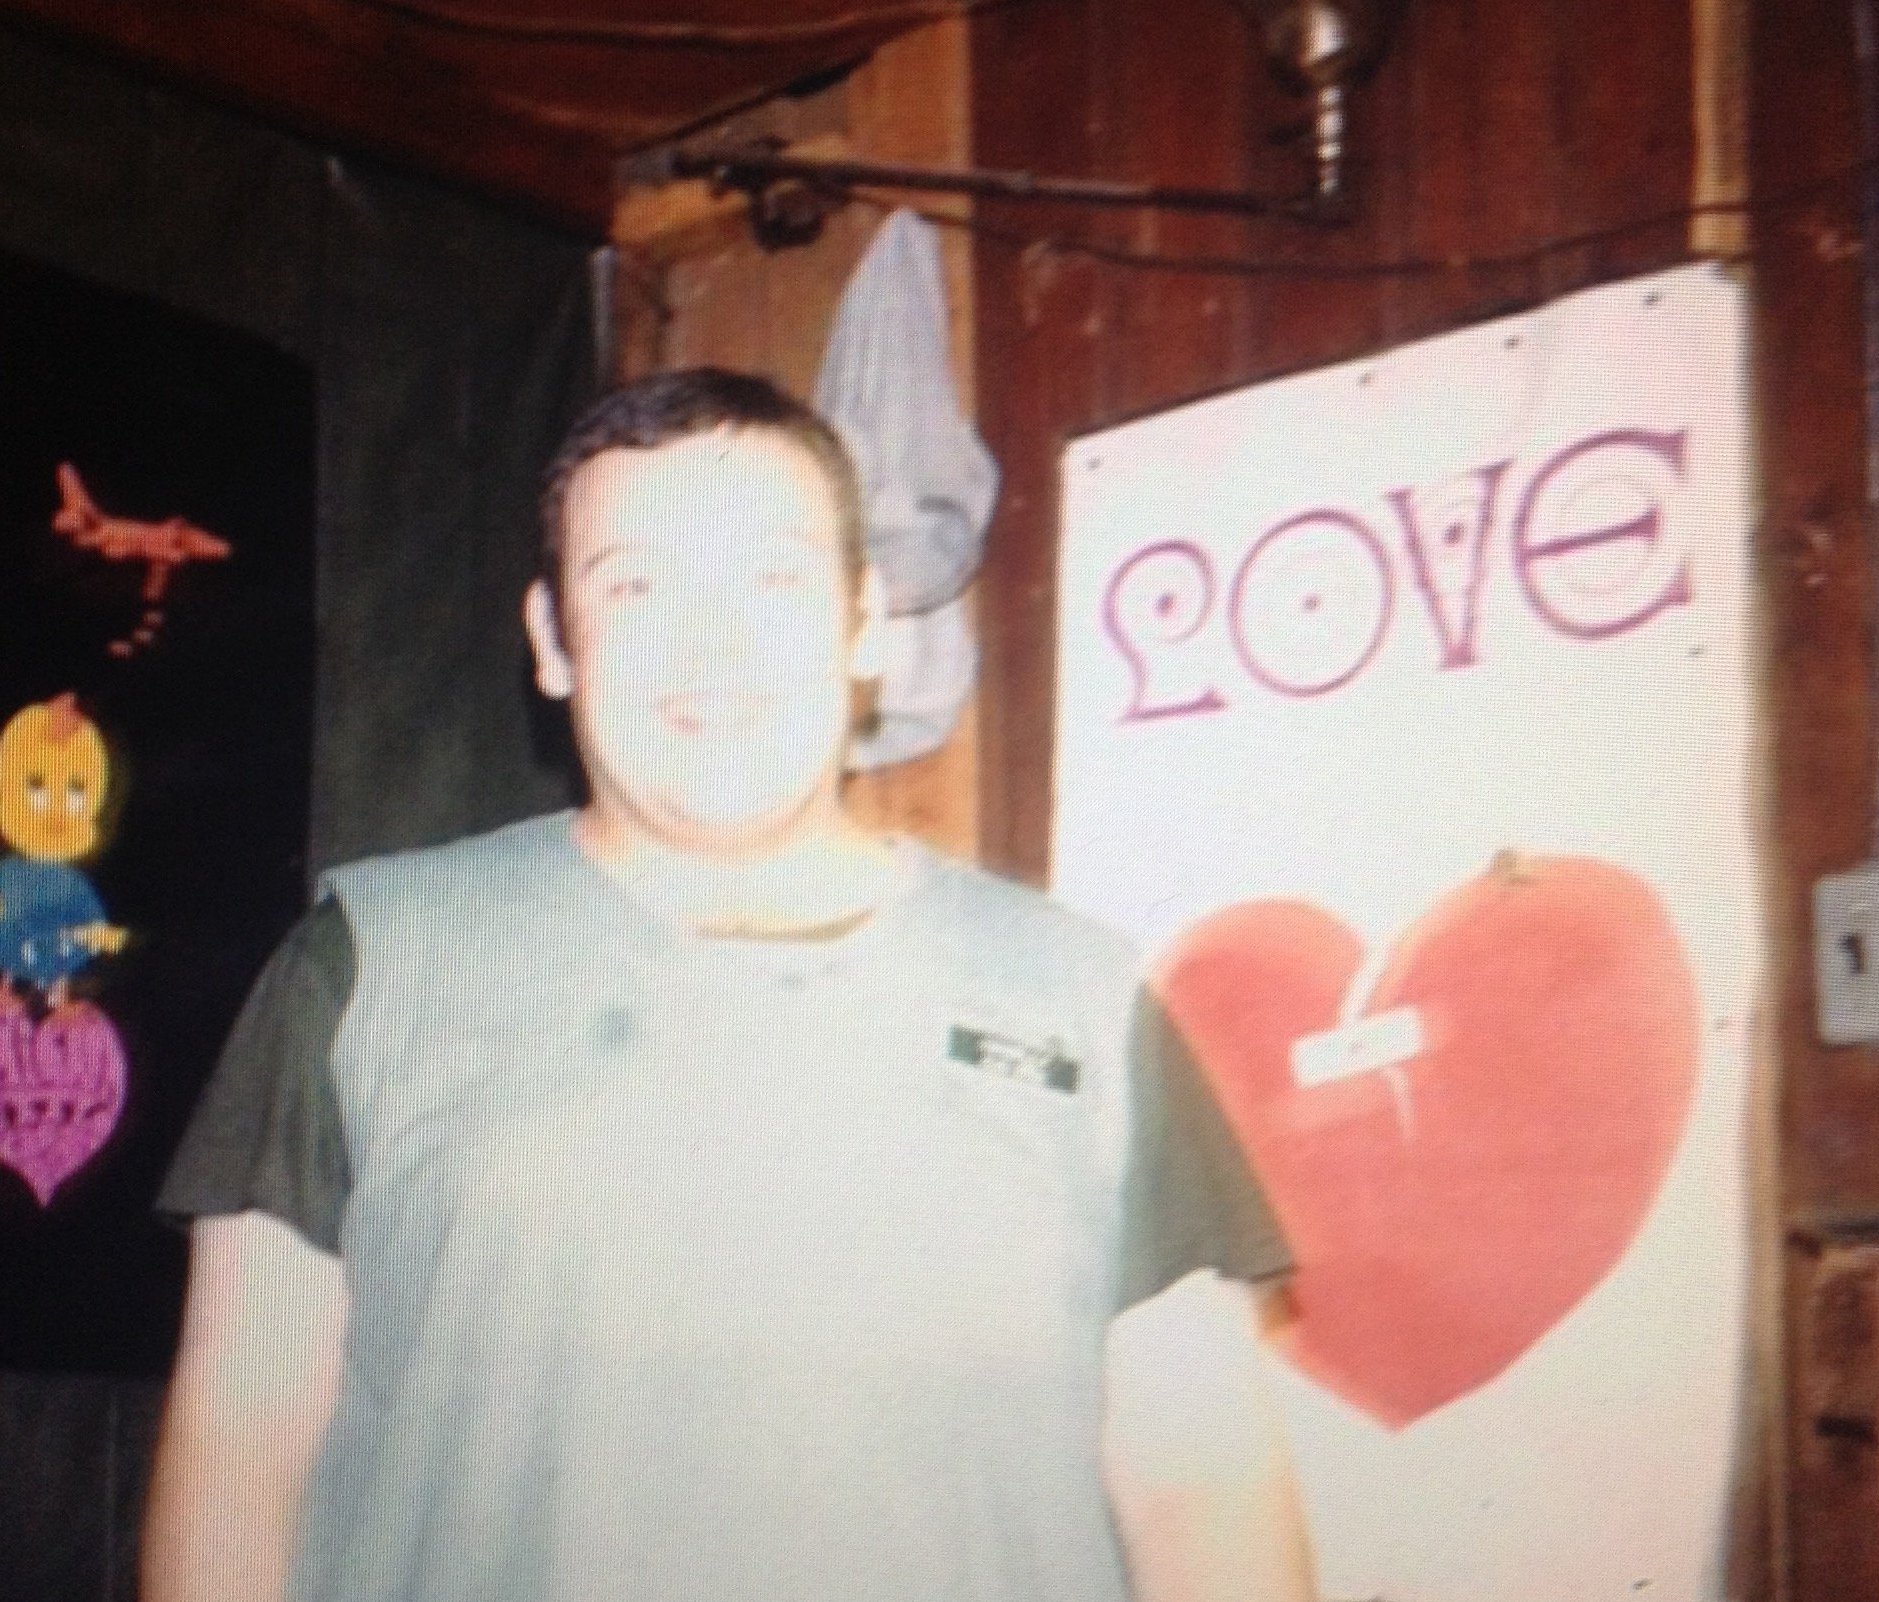 An overexposed photo of a large man in military scrubs standing in front of a poster that says "LOVE" and has a breaking heart on it.